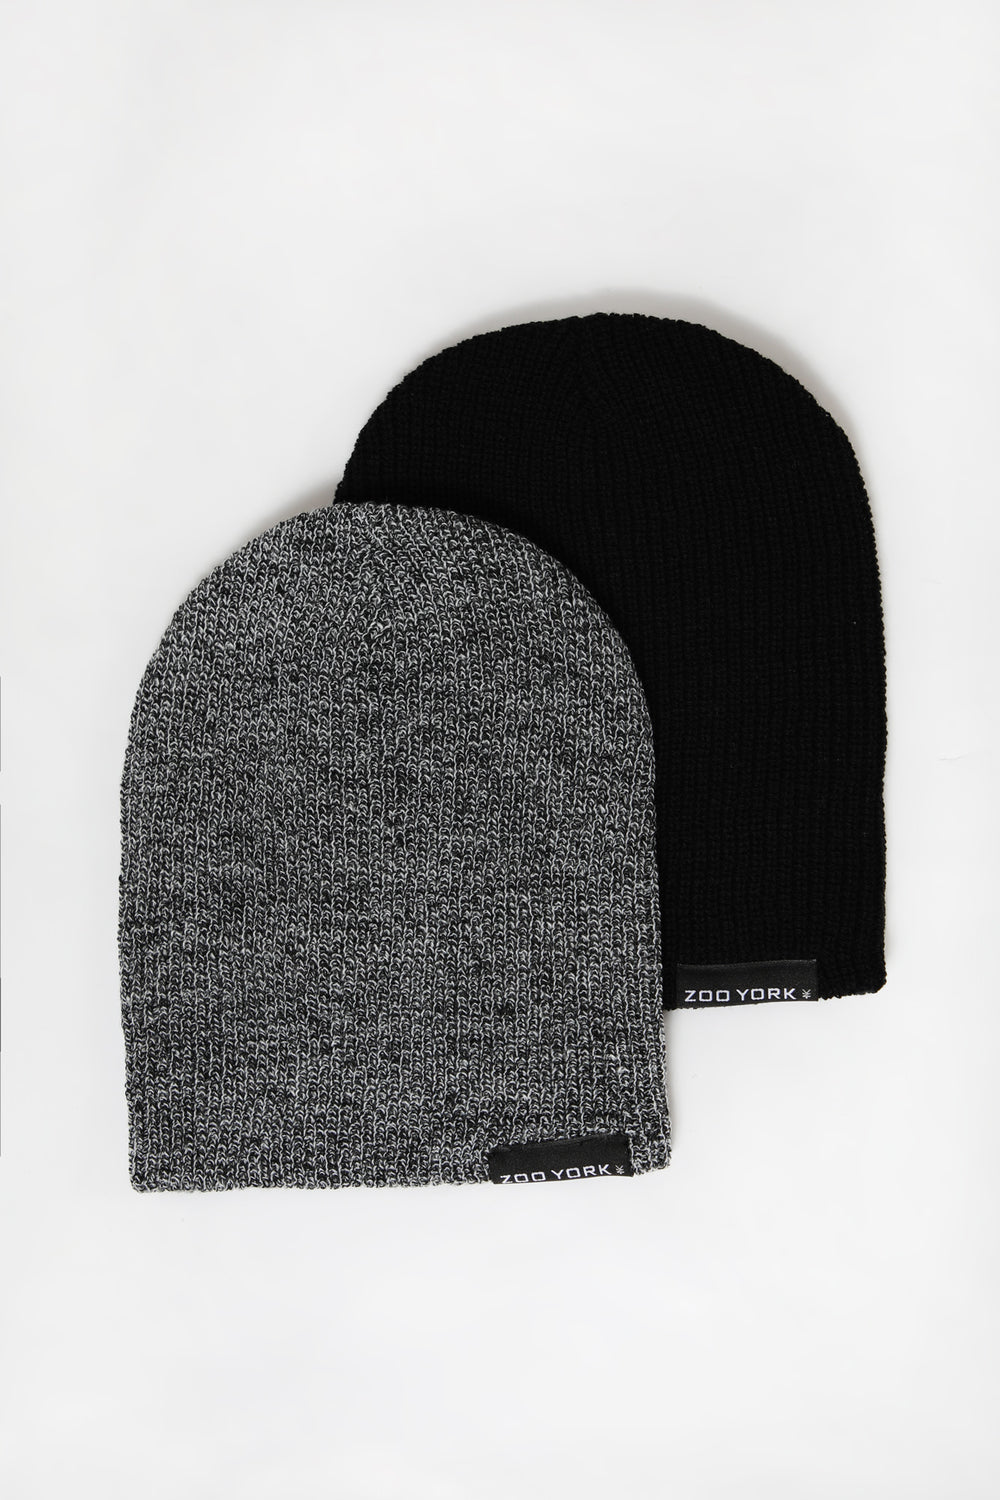 2 Tuques Style Slouchy Zoo York Homme Noir et blanc